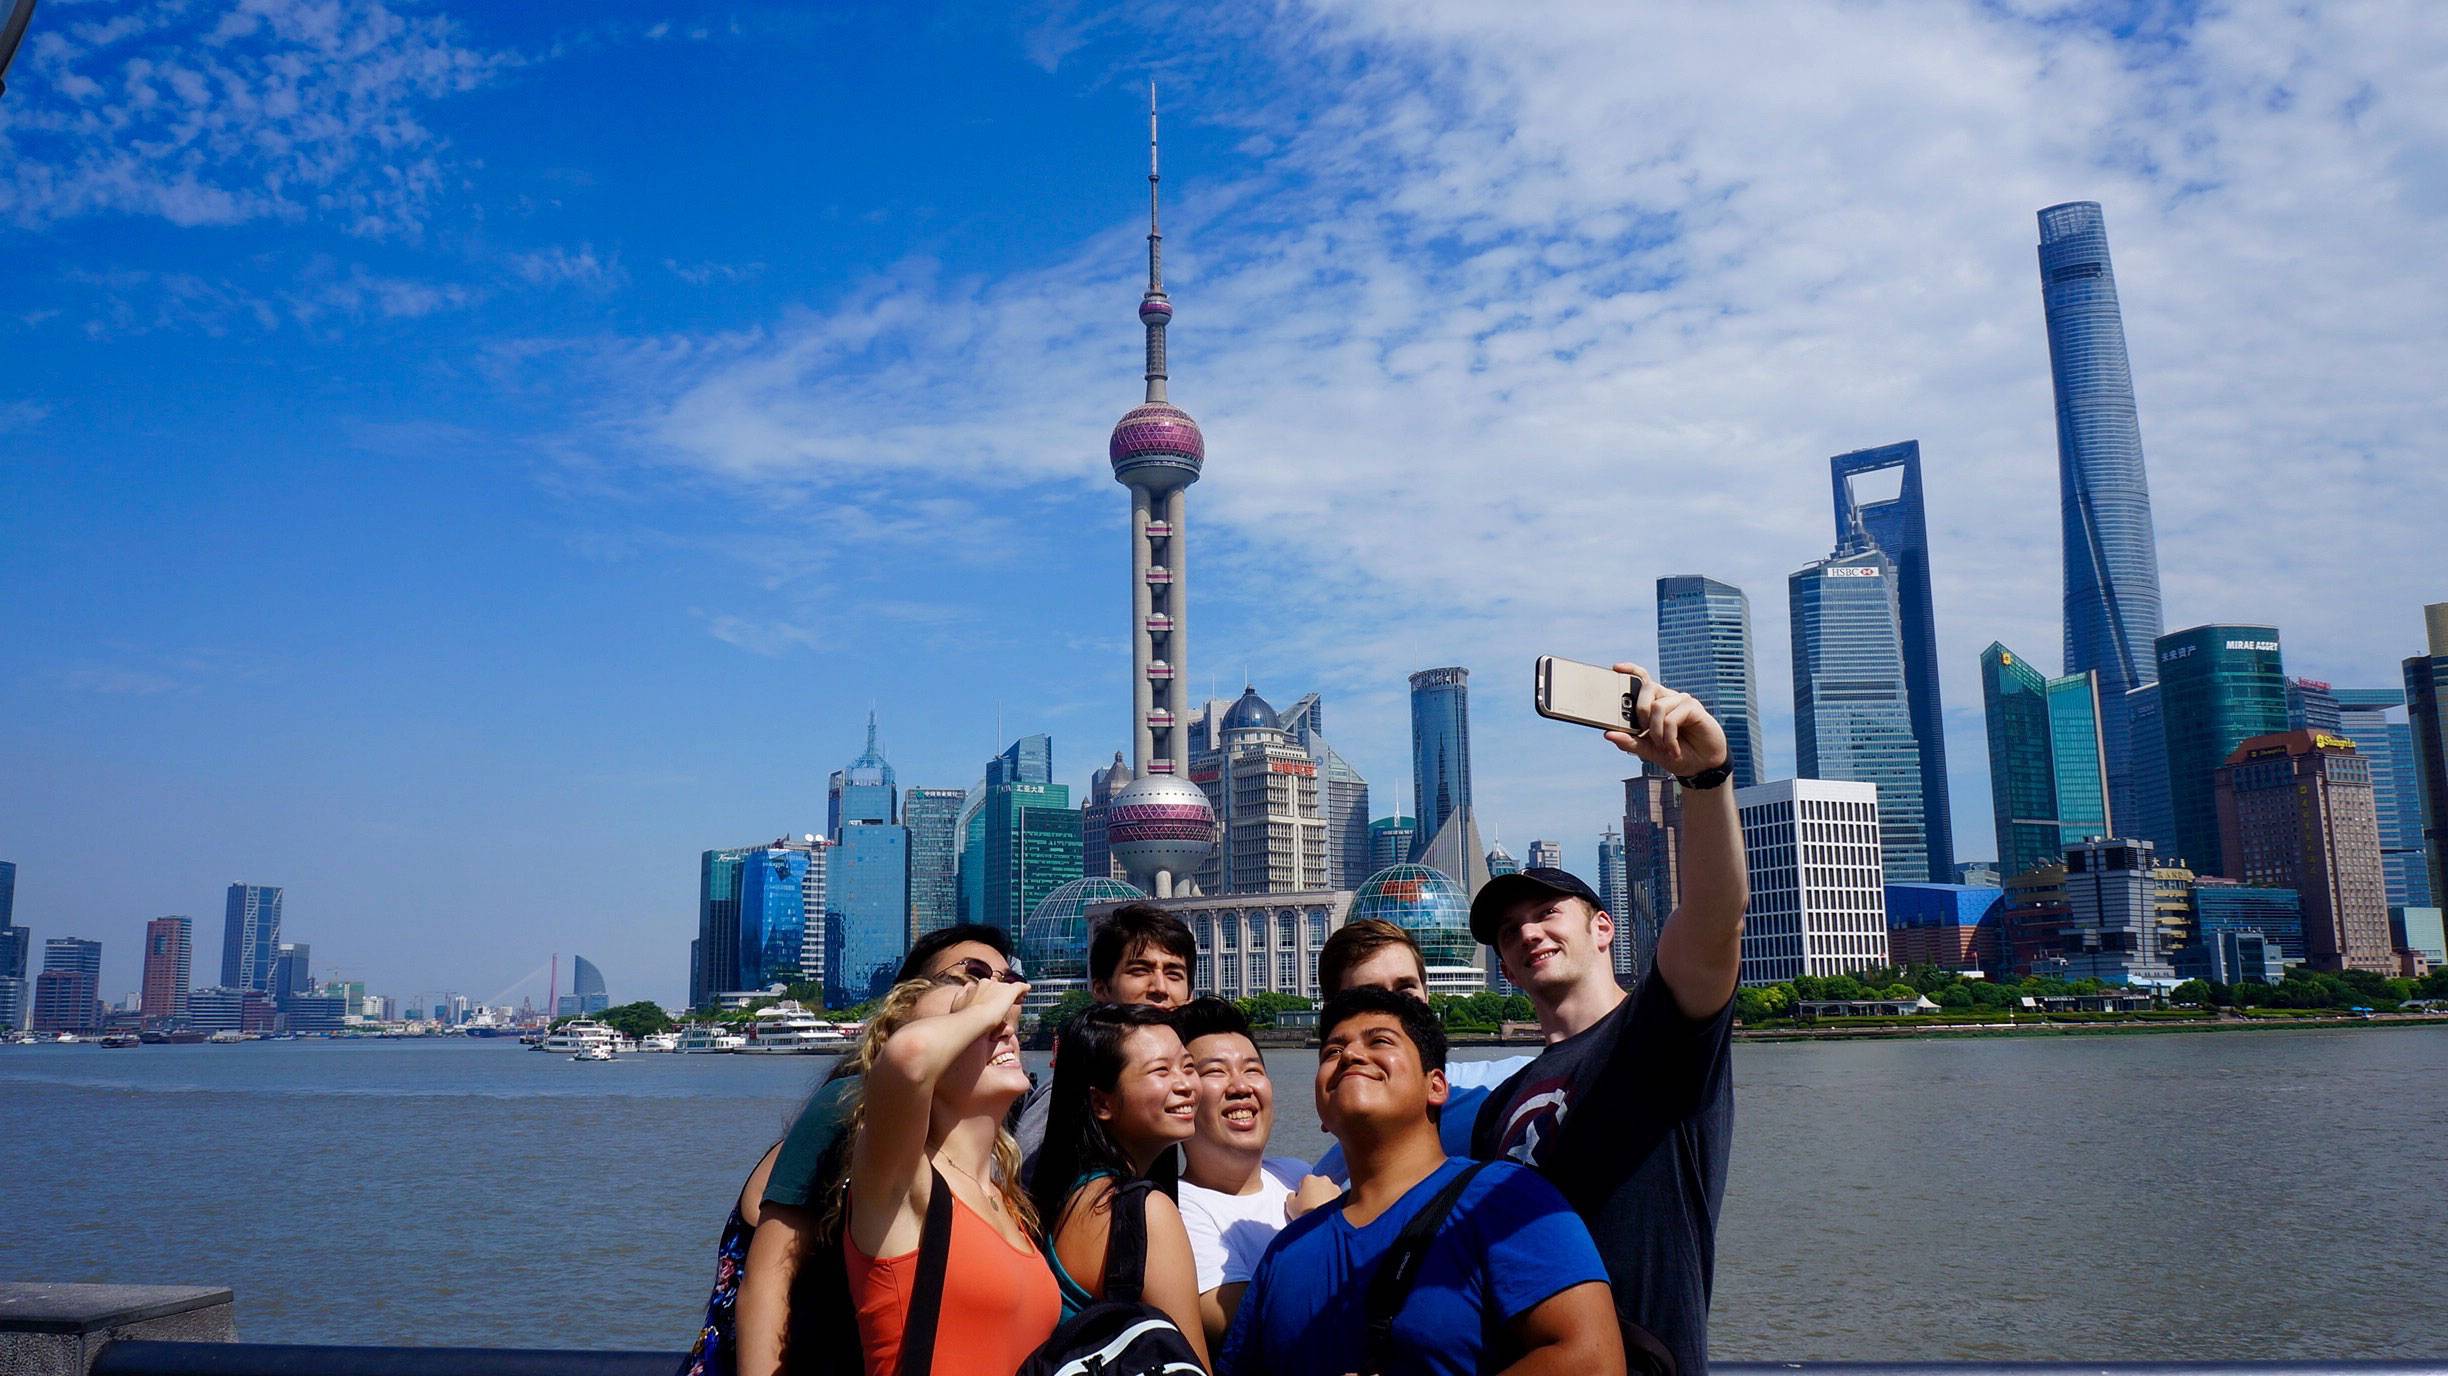 8 students taking a selfie by the water, Beijing, China, skyline in background